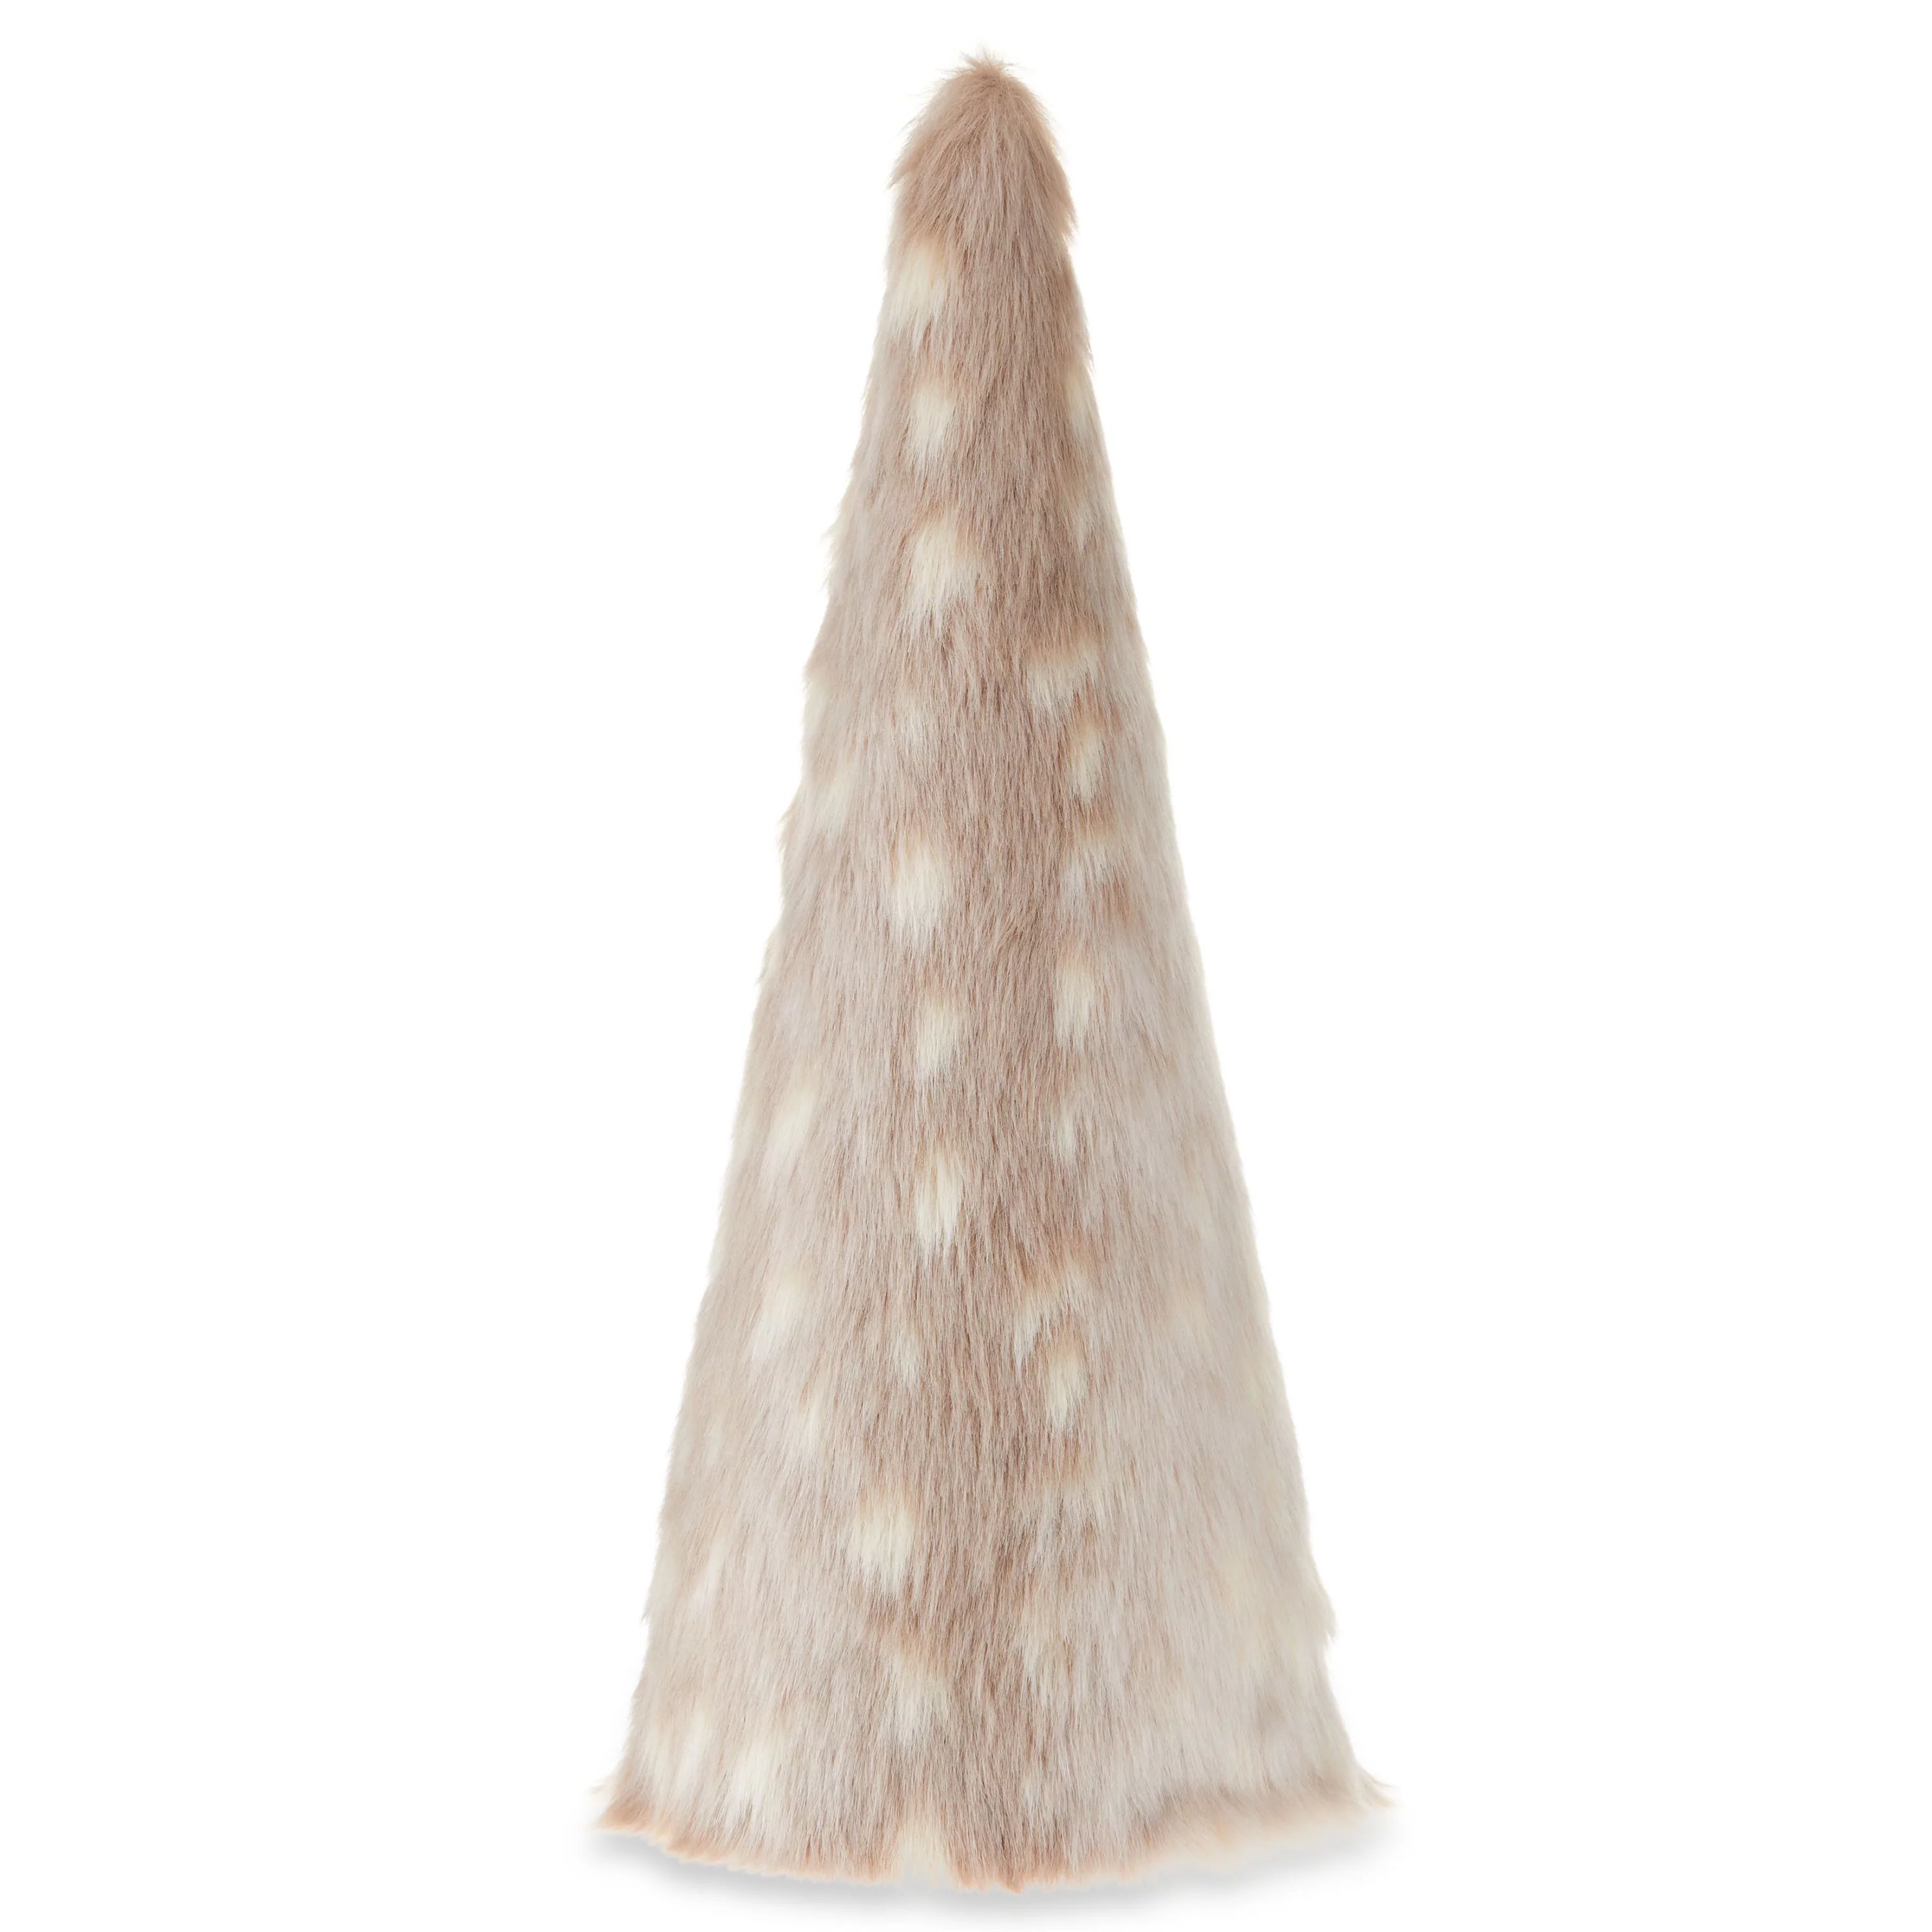 Large Light Brown Fabric Cone Tree Christmas Decoration, 14", by Holiday Time | Walmart (US)